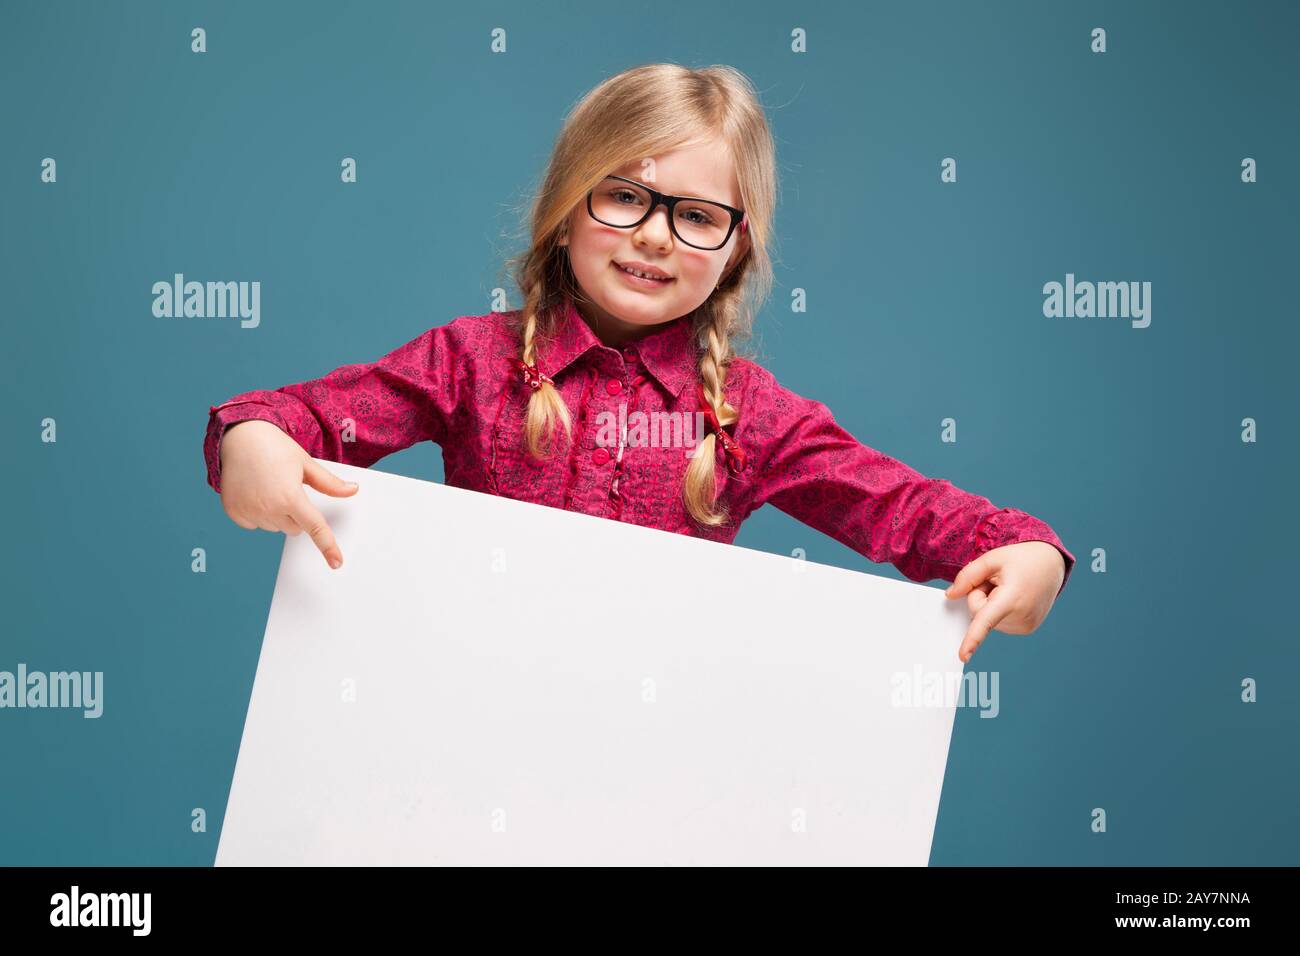 Adorable little girl in pink shirt, black trousers and glasses holds empty poster Stock Photo